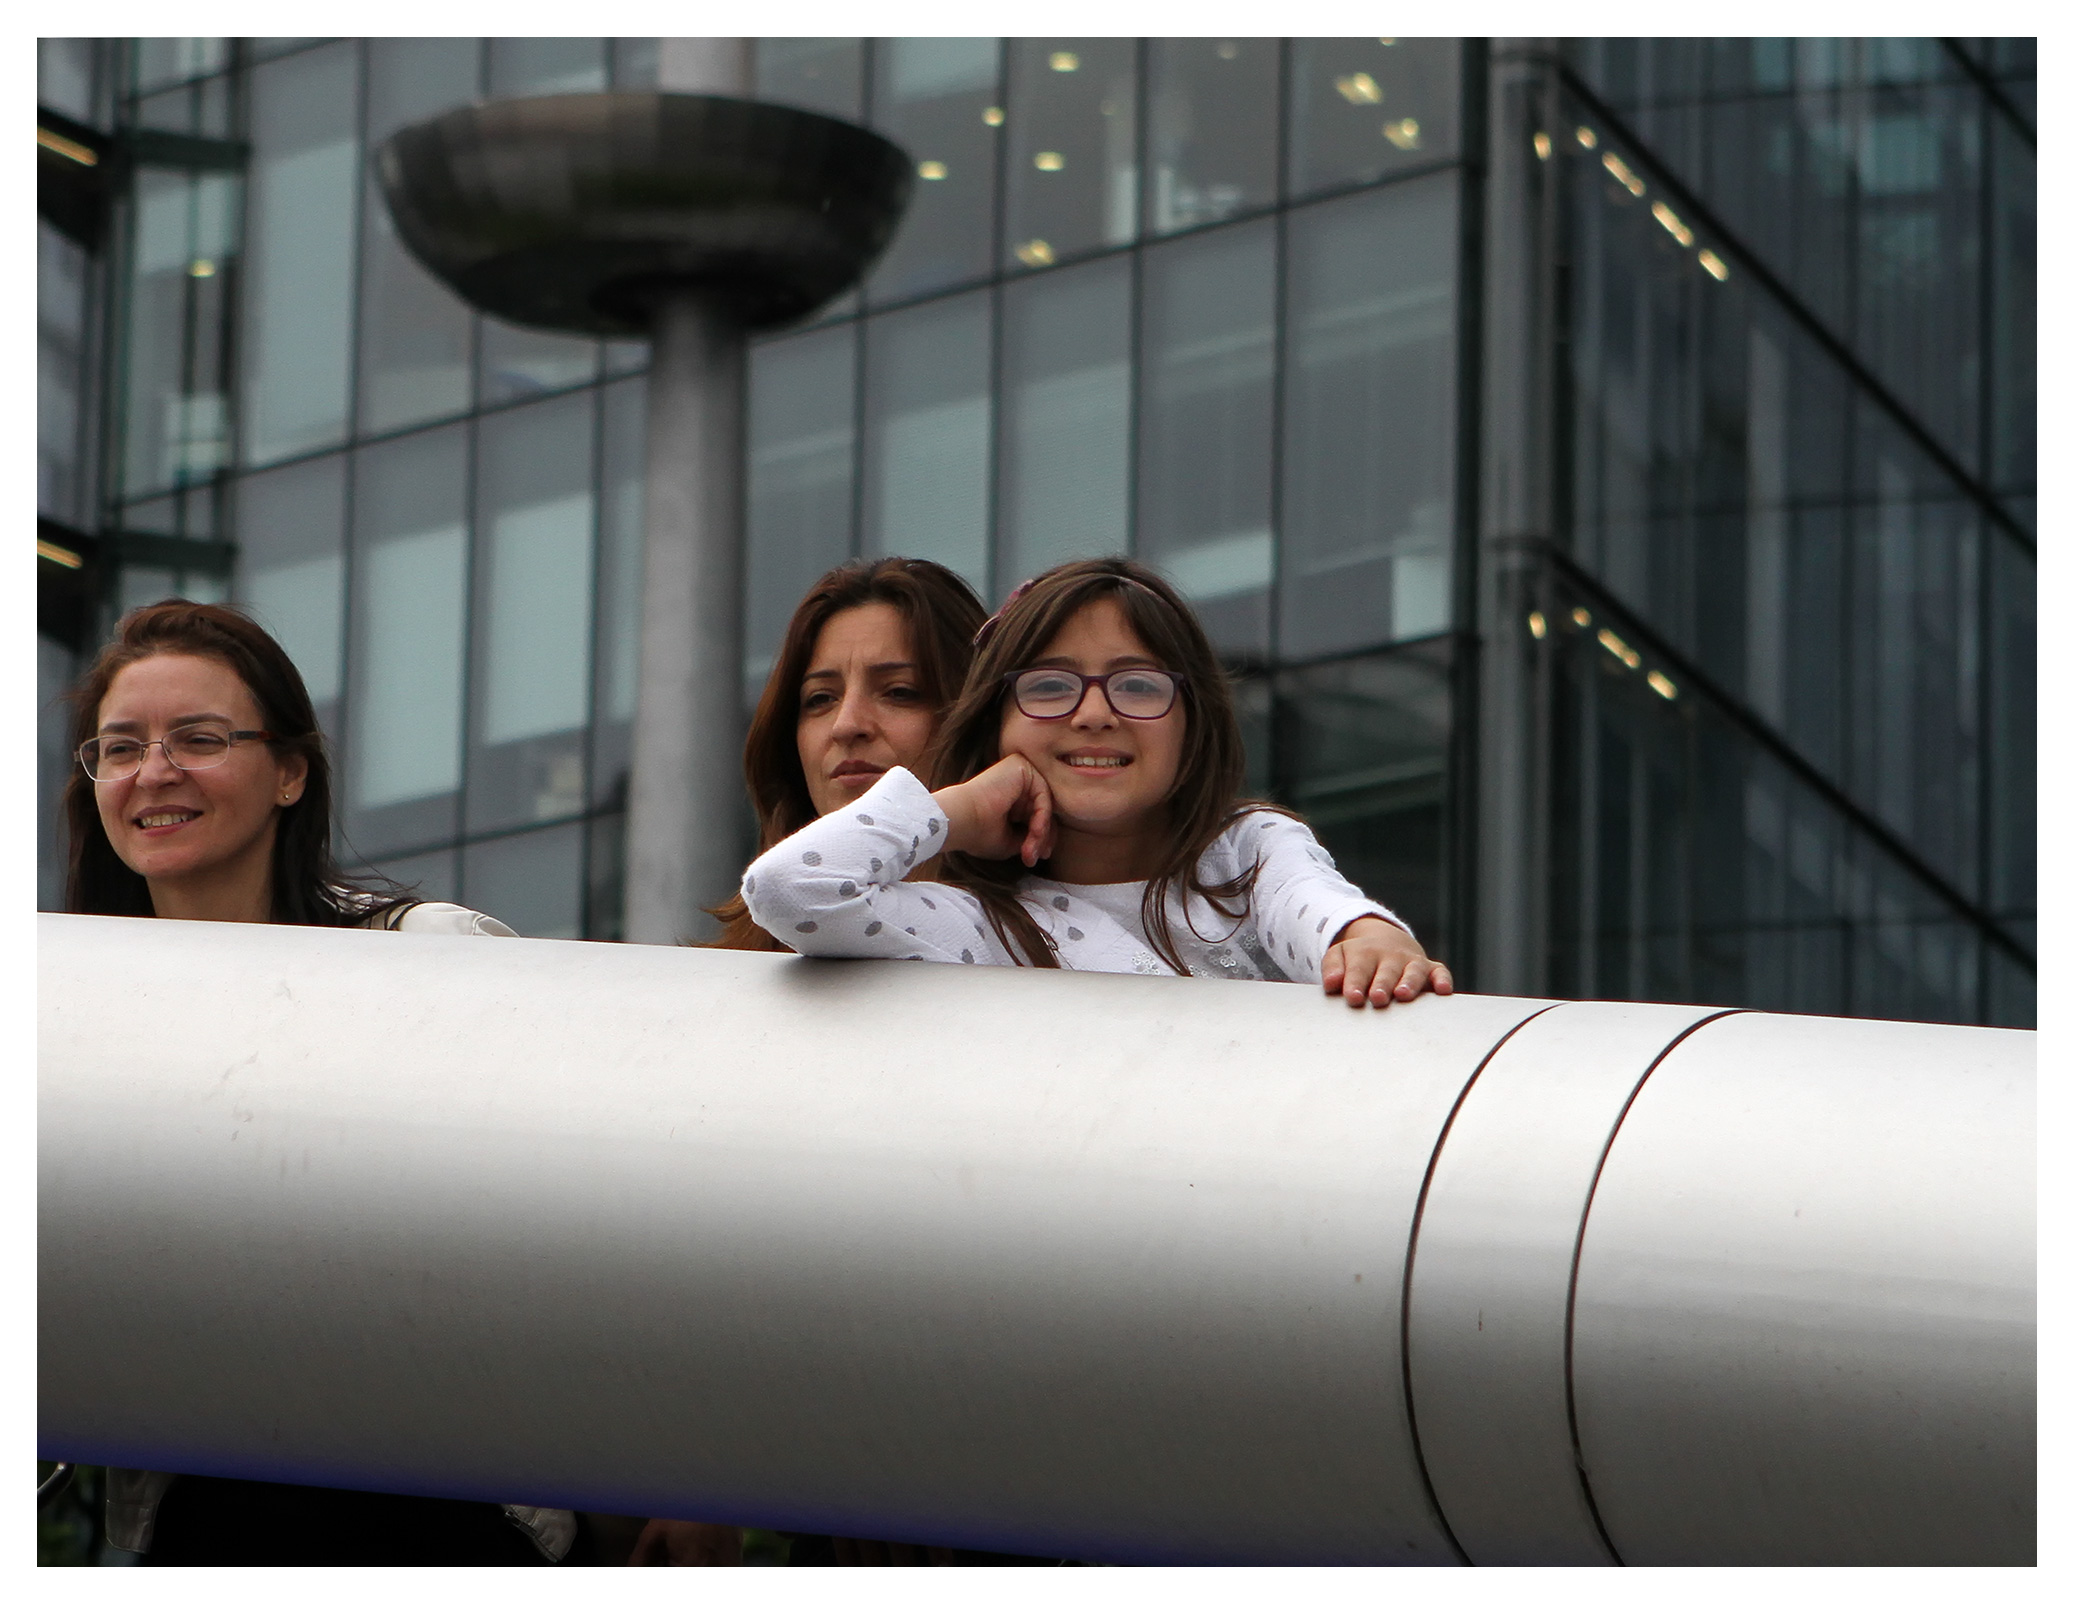 Young girl posing for her picture at 1 London Bridge, England